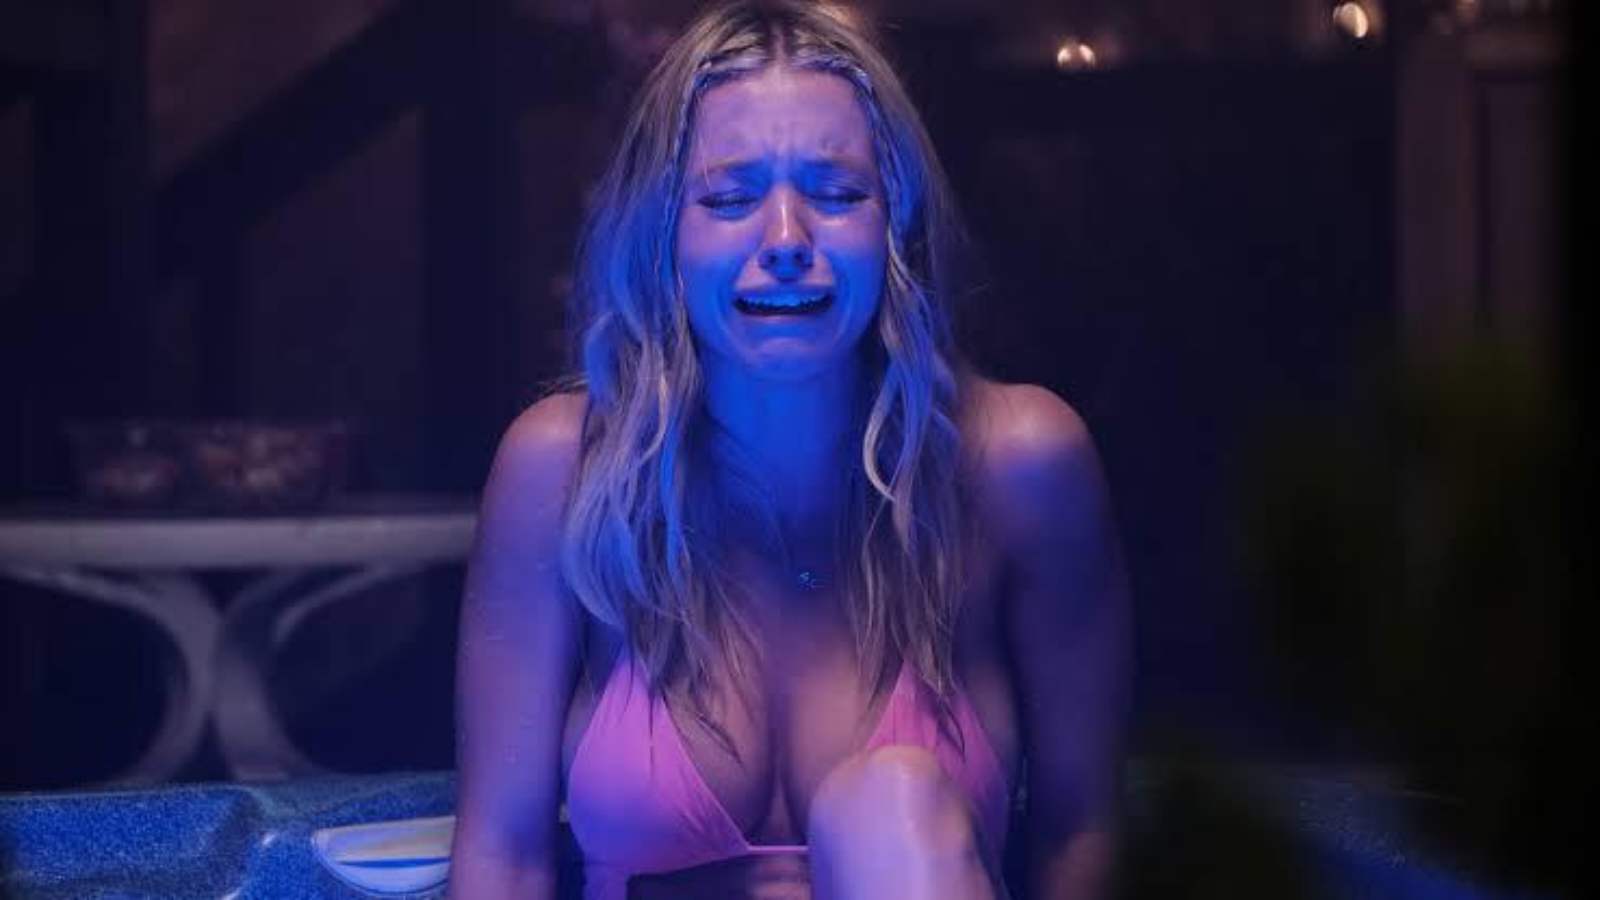 Sydney Sweeney on the hot scenes of Euphoria: 'My father and grandfather turned off the TV and walked away'